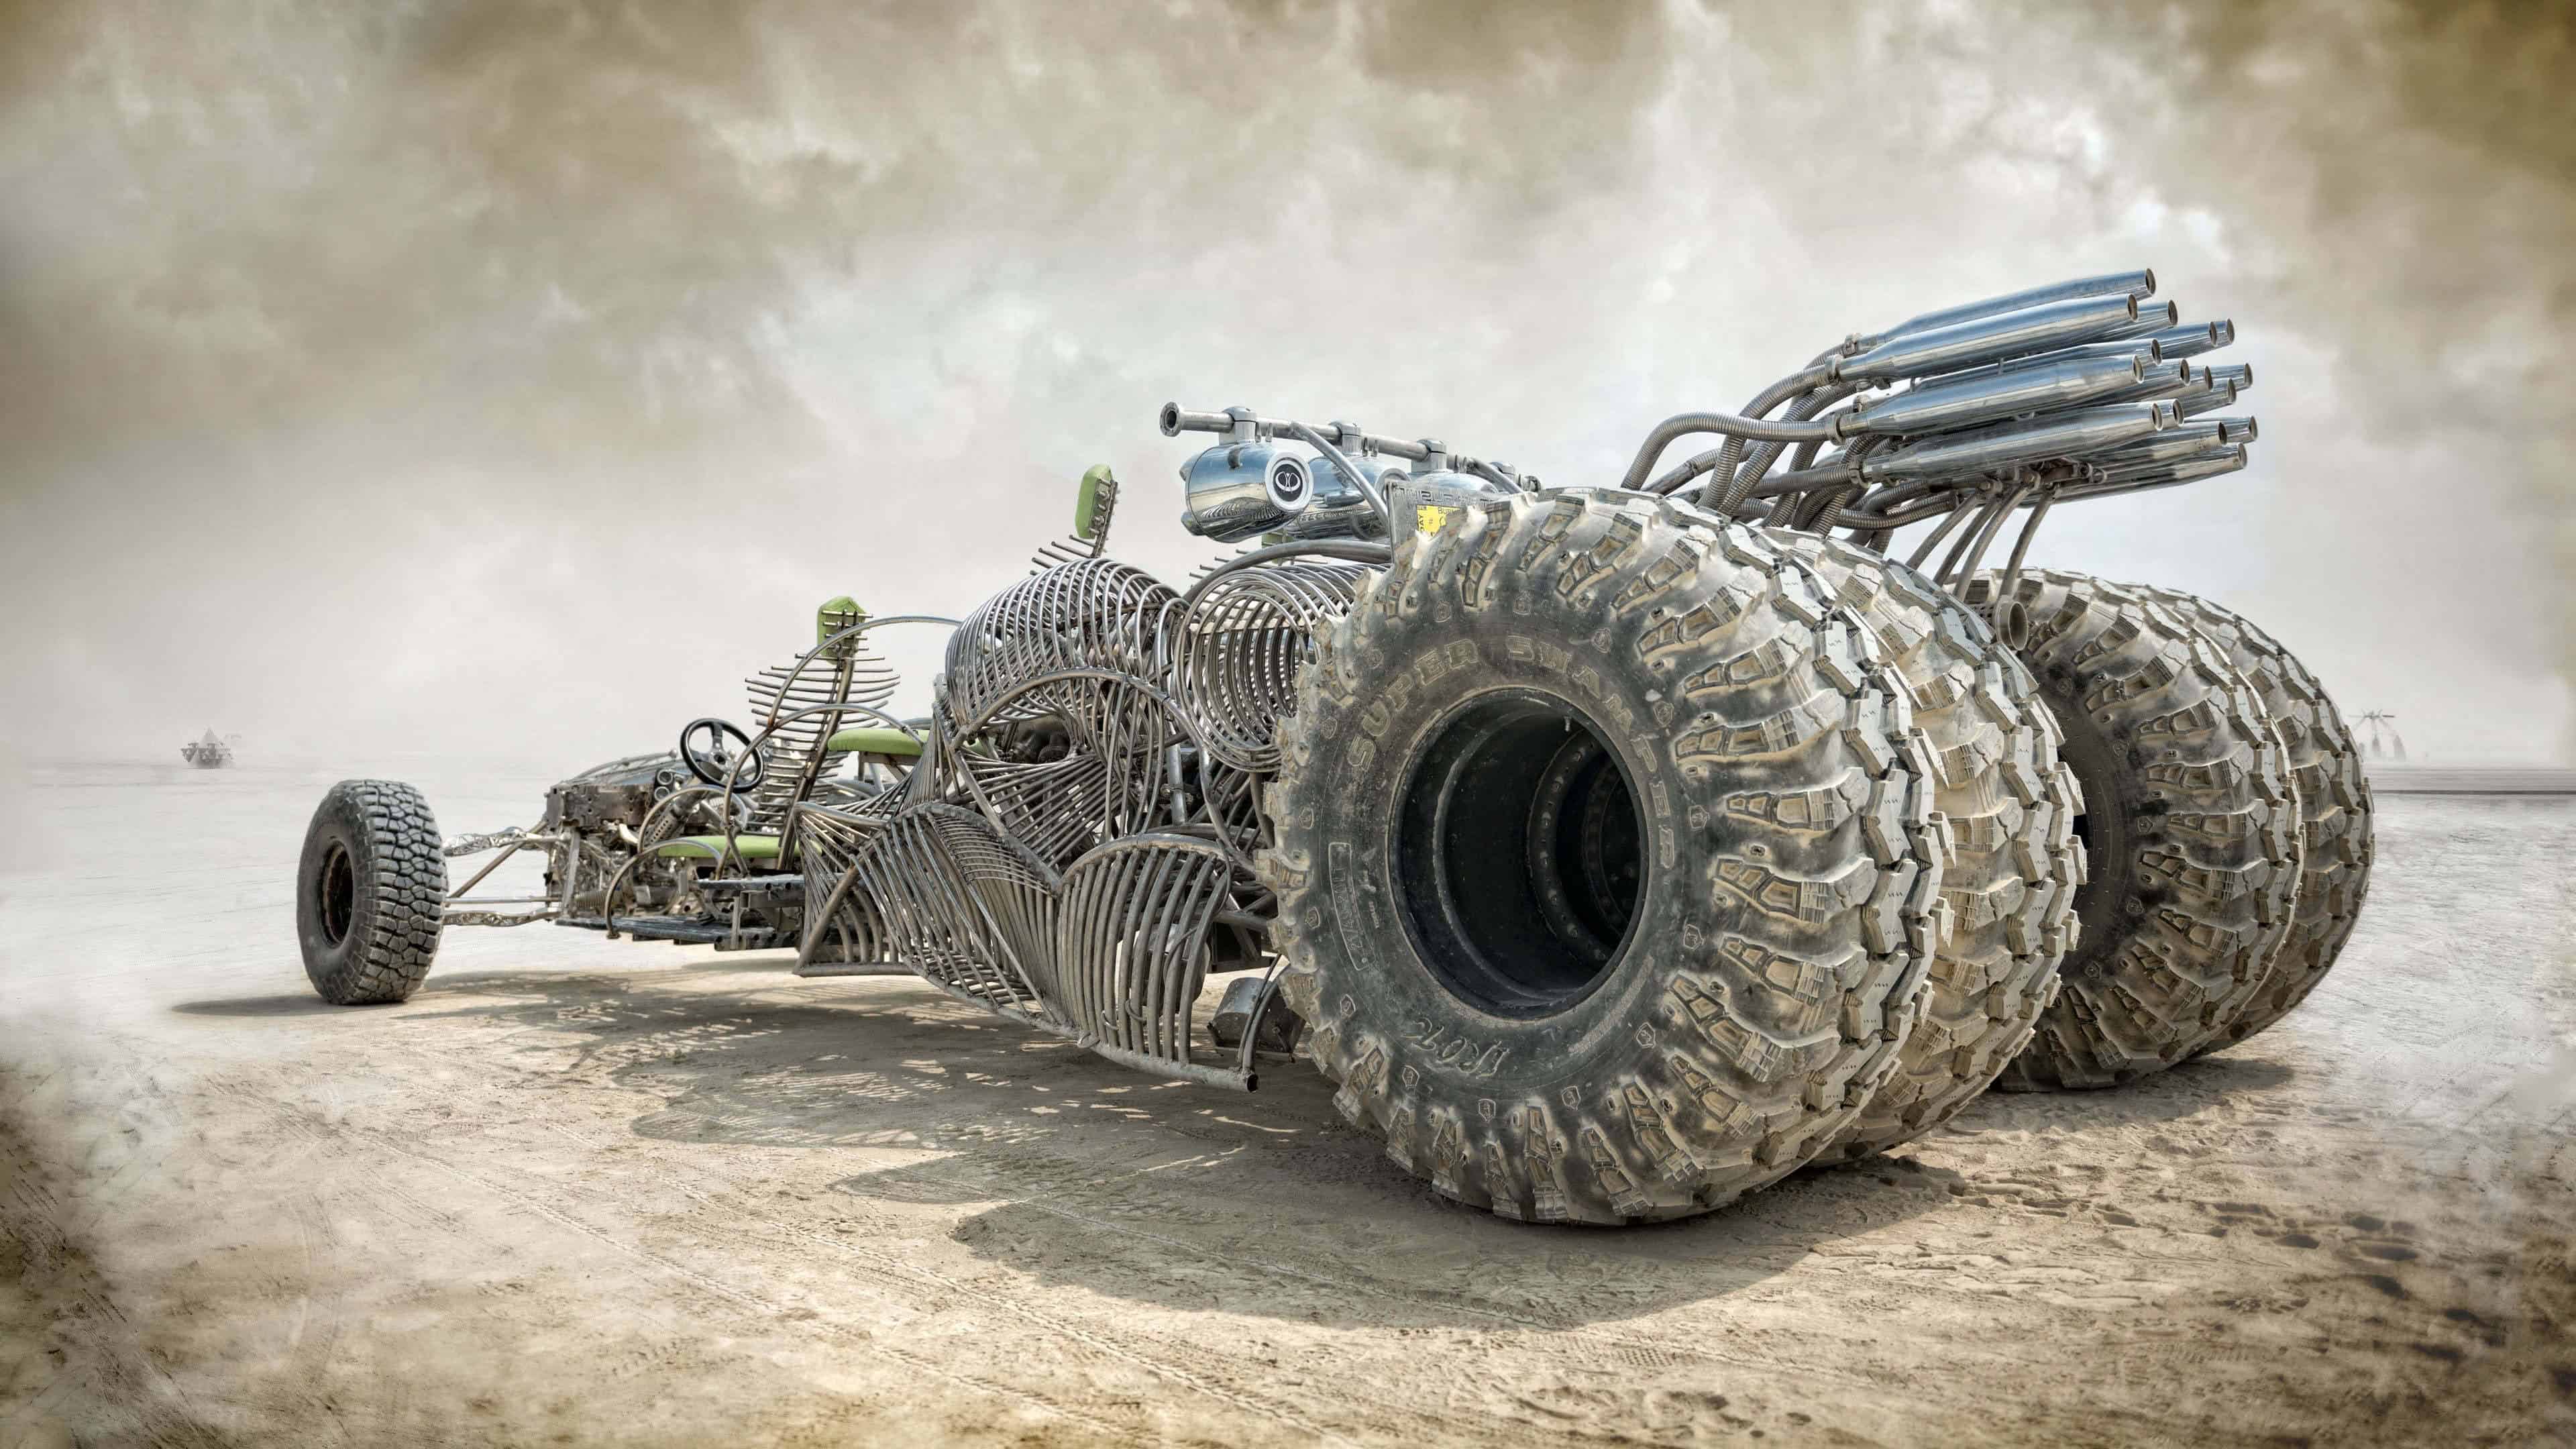 542421 1920x1080 mad max fury road  Full HD Background JPG 676 kB  Rare  Gallery HD Wallpapers